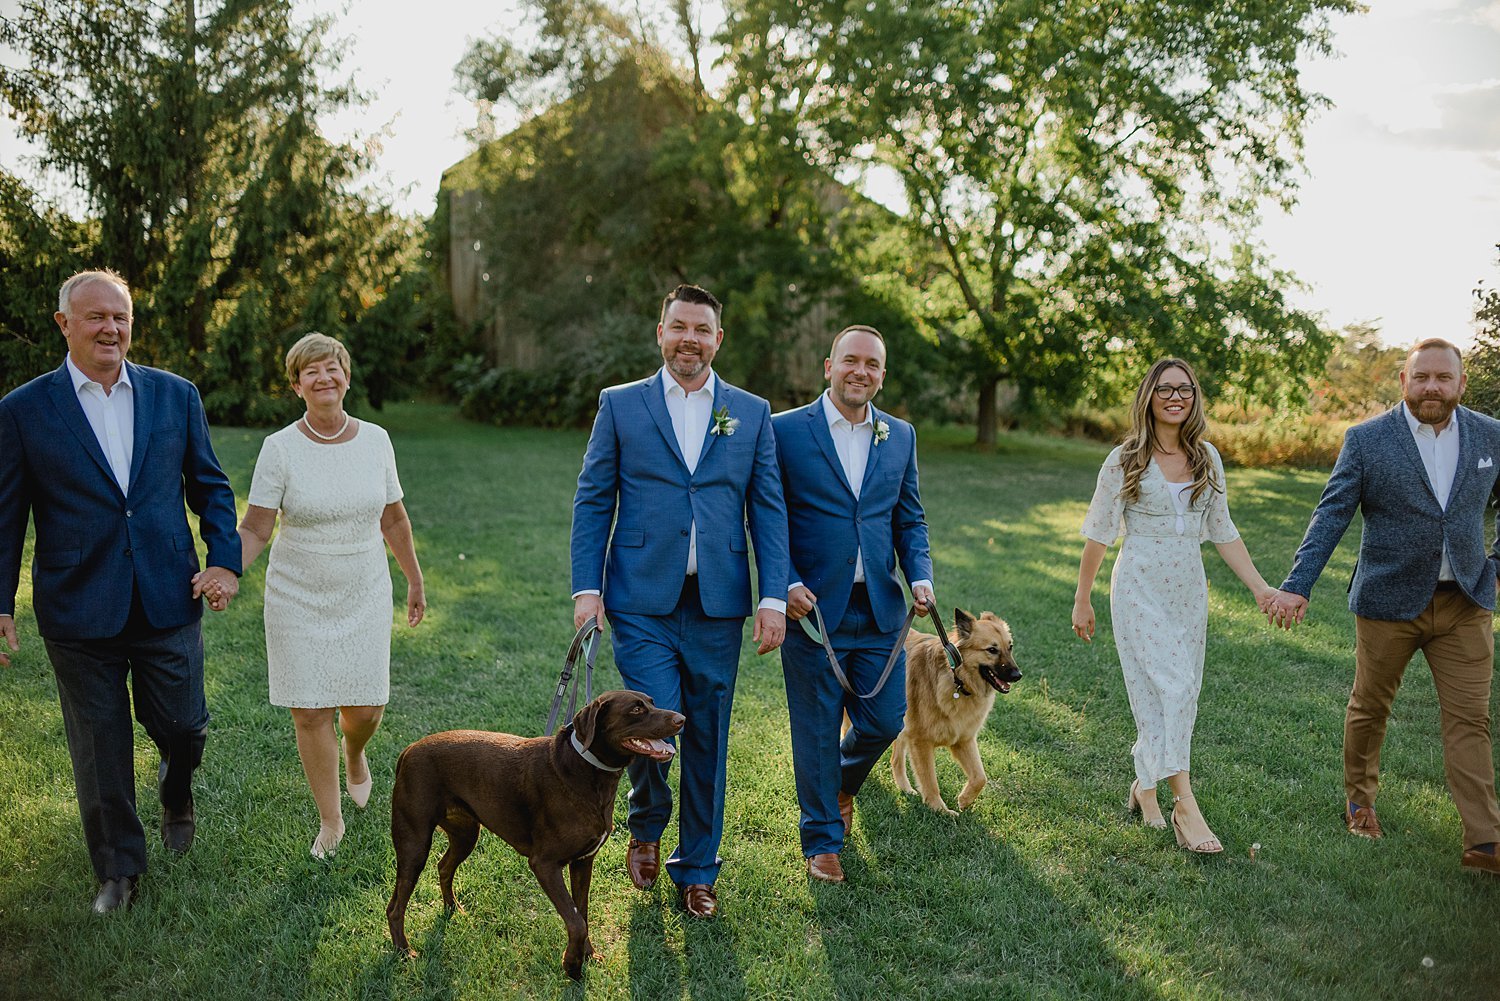 An Intimate Elopement at an Airbnb in Prince Edward County | Prince Edward County Wedding Photographer | Holly McMurter Photographs_0013.jpg